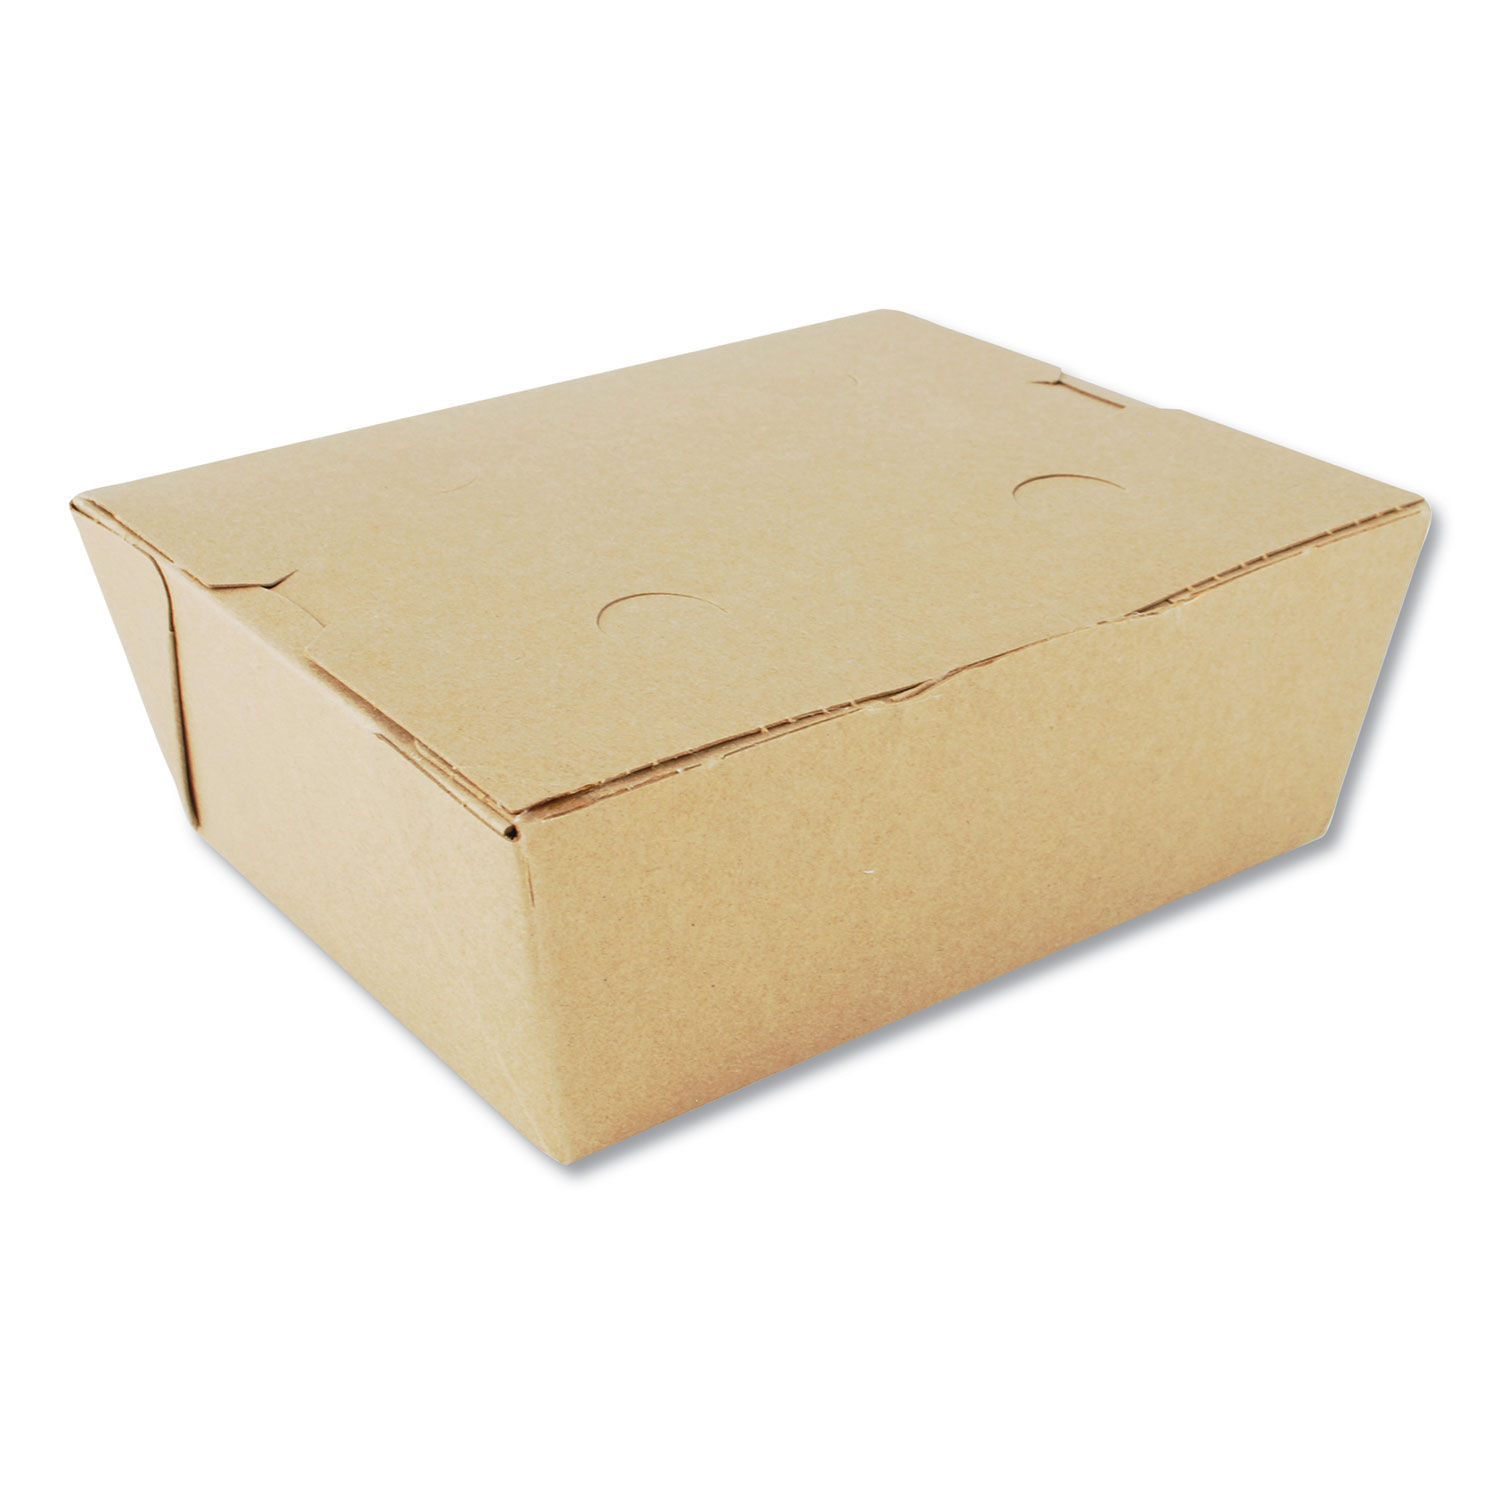 9X7X4 75 PACK CARDBOARD PAPER BOXES PREMIUM PACKING SHIPPING CORRUGATED CARTON